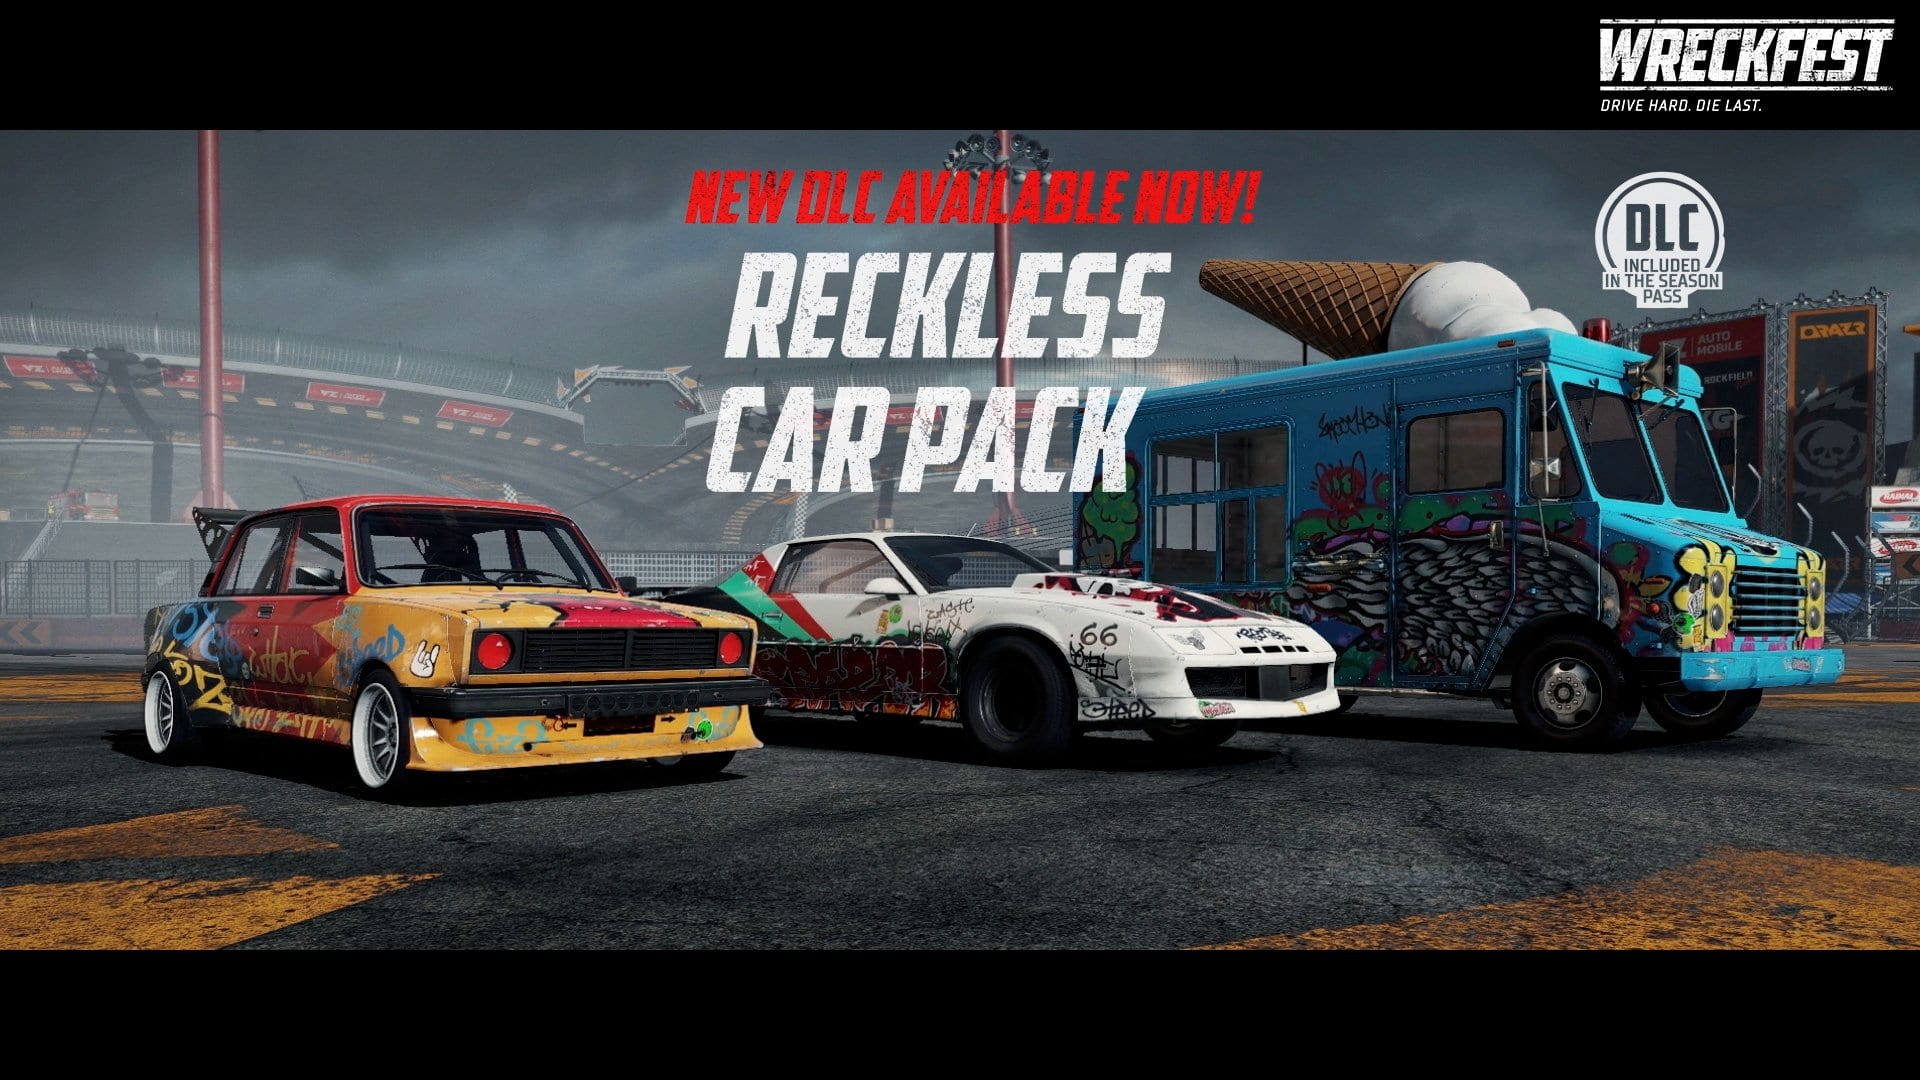 Wreckfest – Wrecknado Warning: New championship and new car package on the way